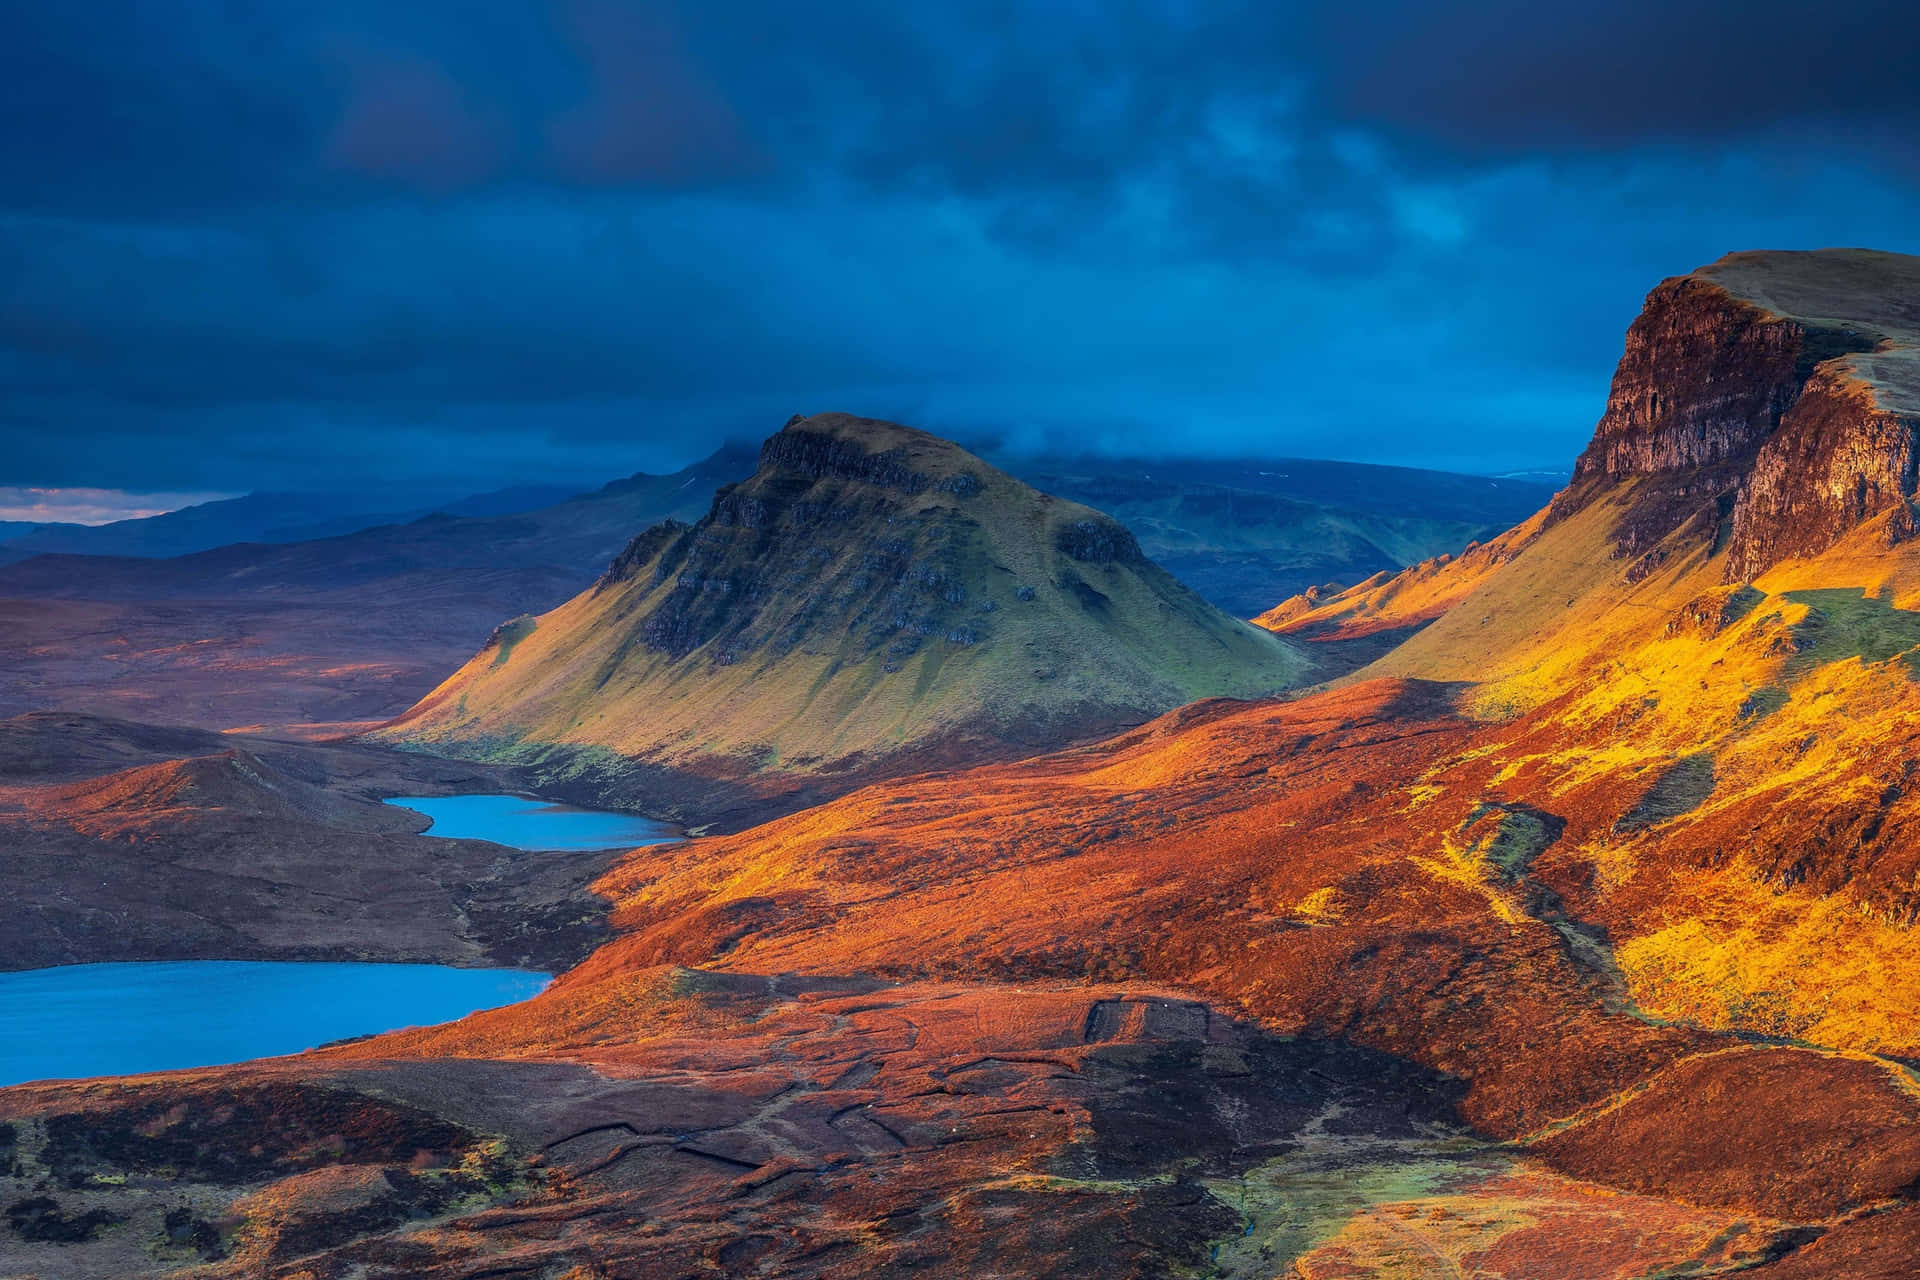 "Experience The Majestic Beauty of Scotland From Your Desktop" Wallpaper